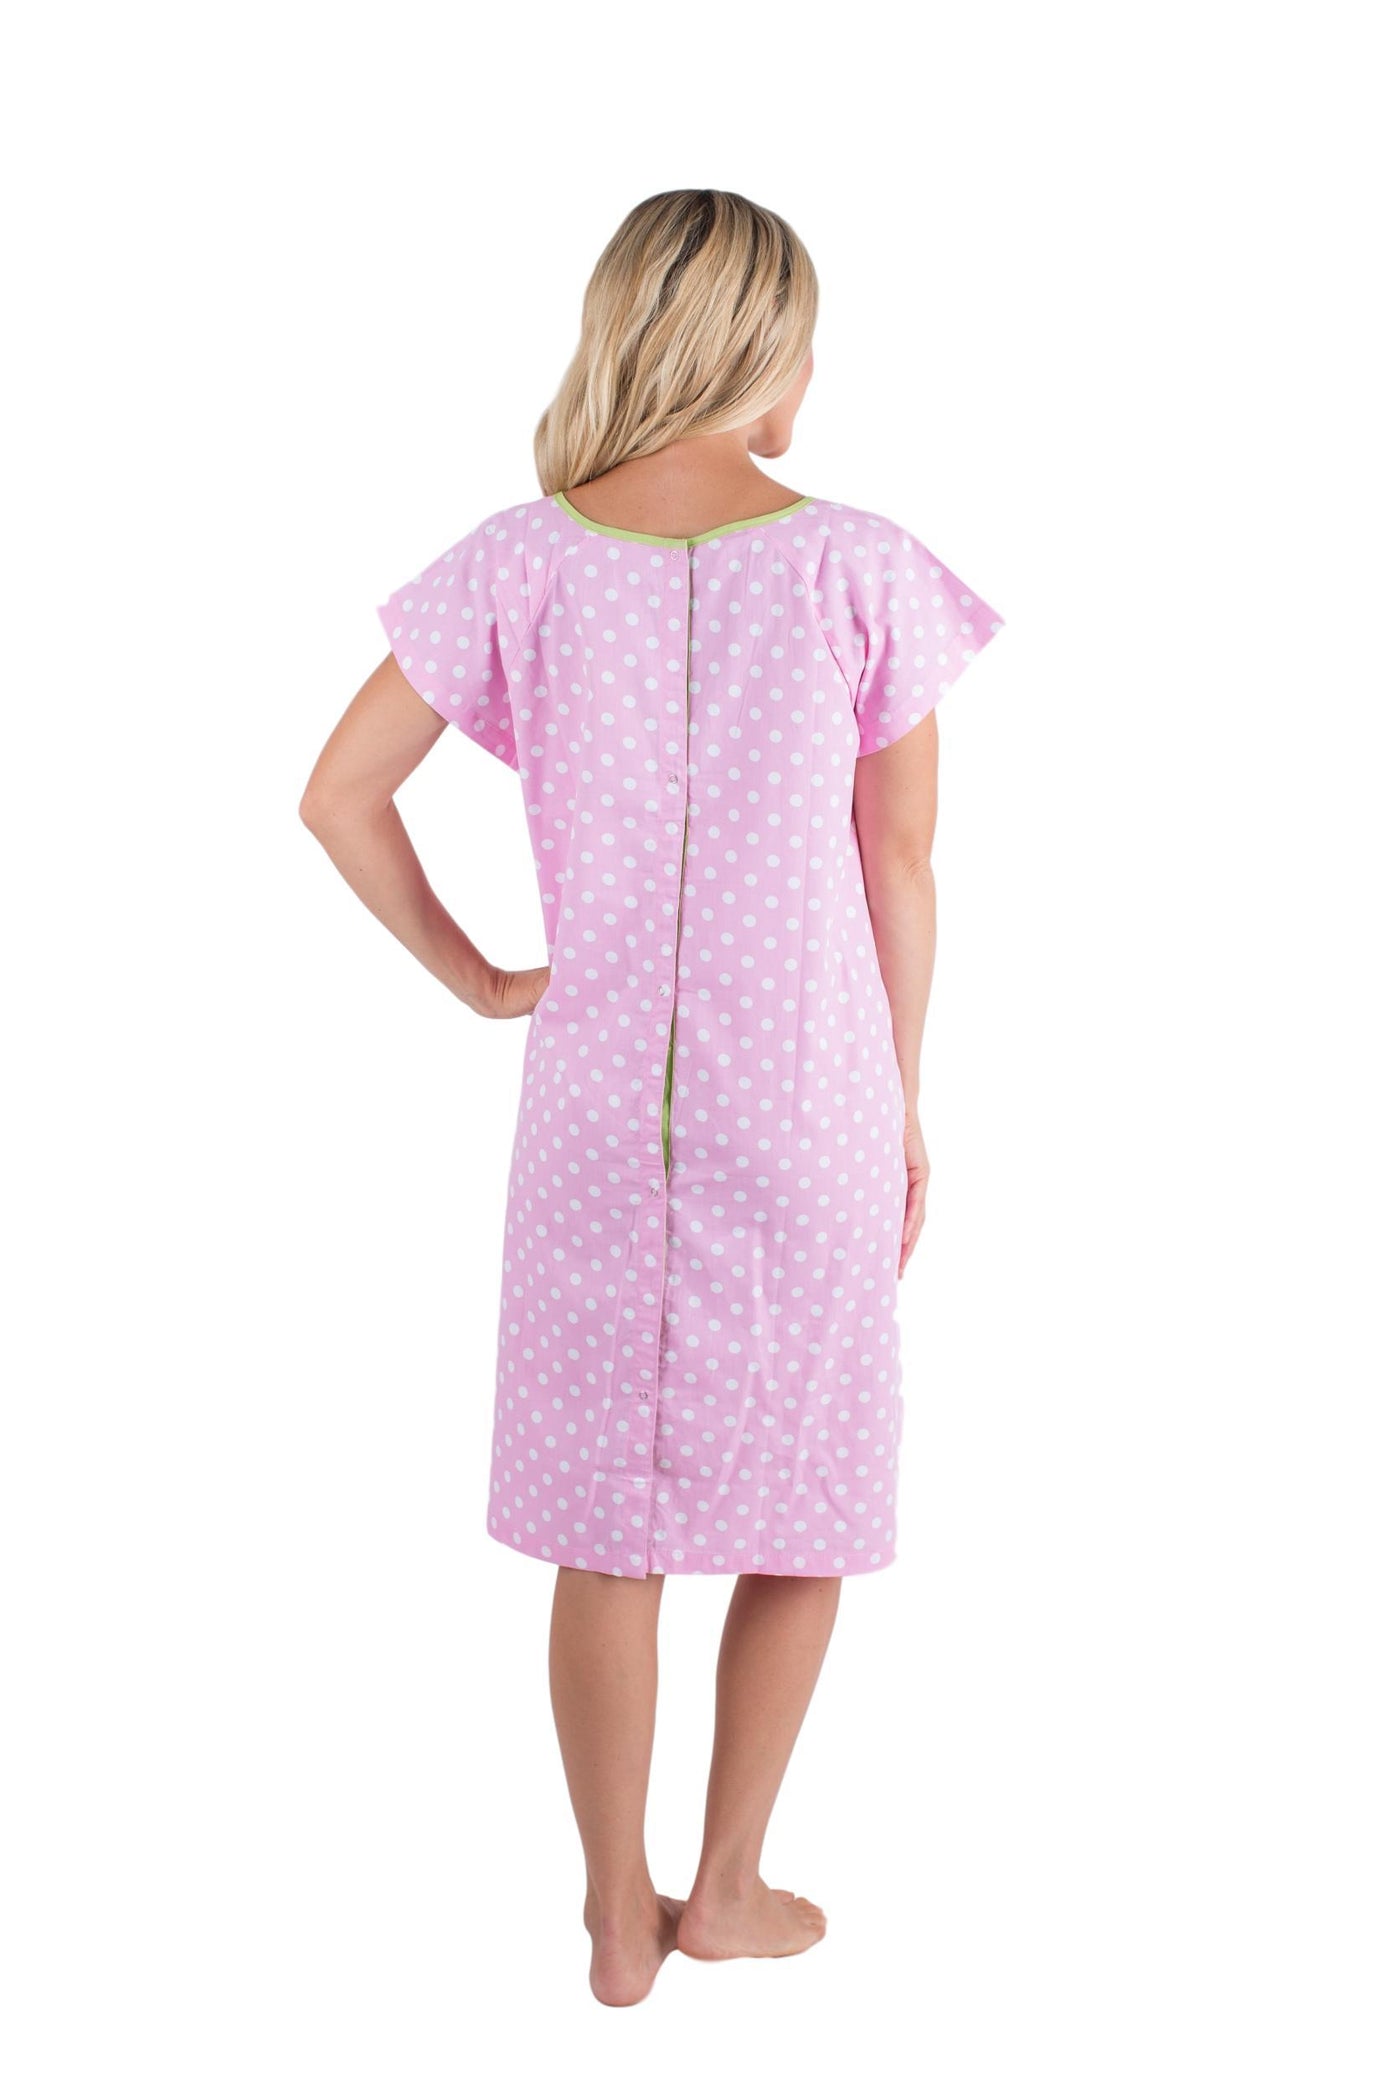 Molly Gownie Maternity Delivery Labor Hospital Birthing Gown